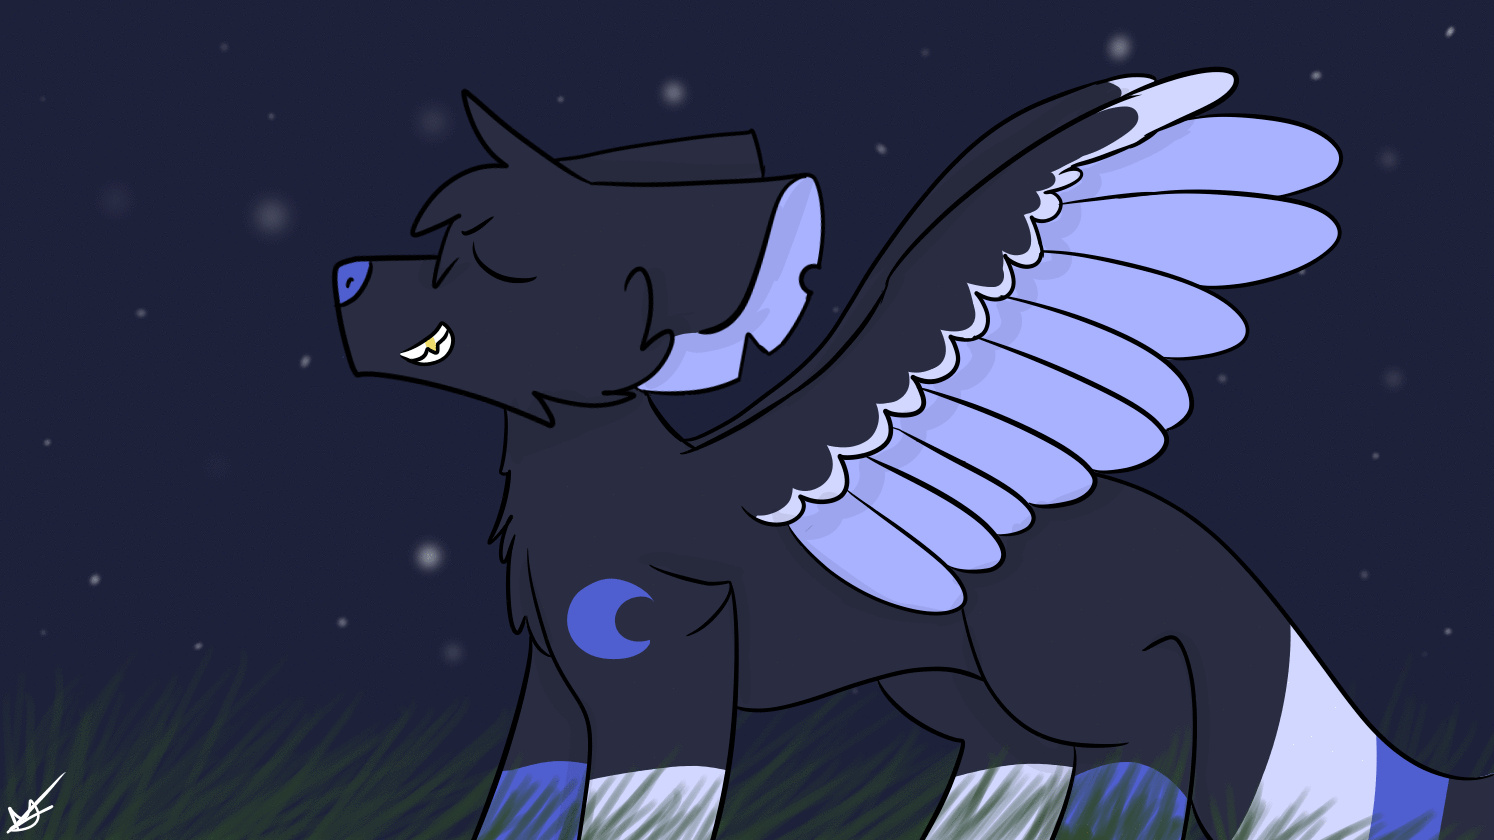 Wolf with Wings by MoonLightTheDog on DeviantArt